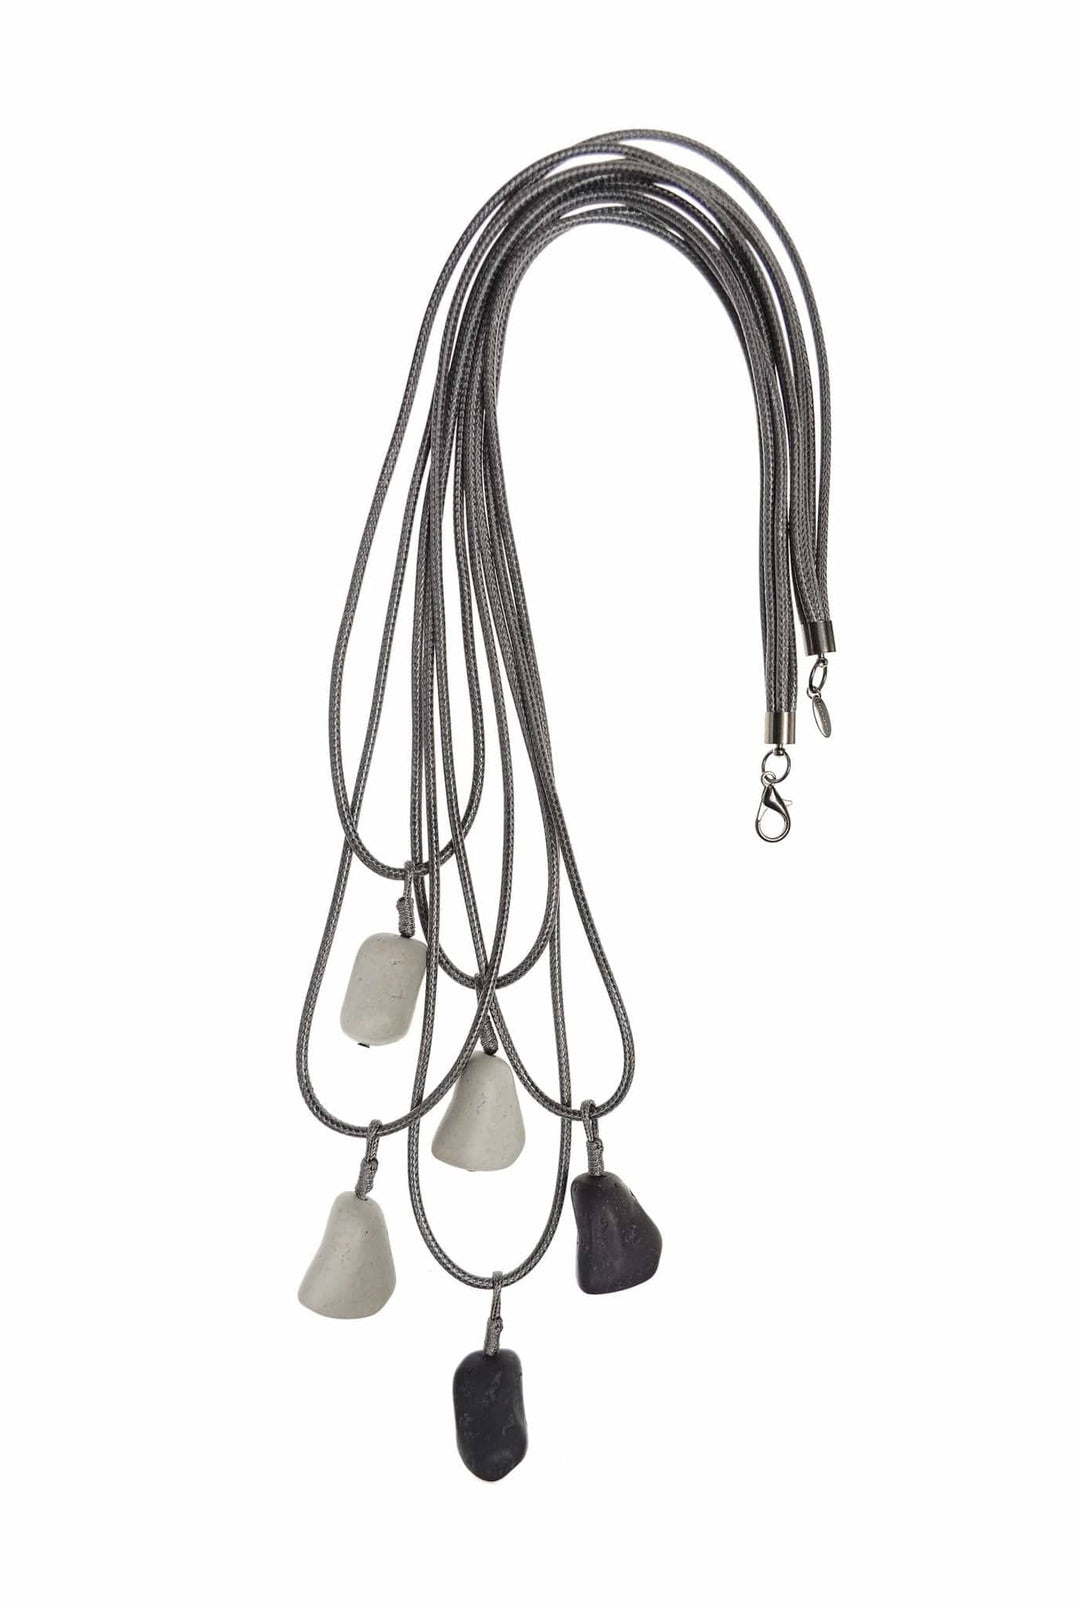 Hot Tomato Layered Stone Collaboration Necklace In Grey Tones - Crabtree Cottage